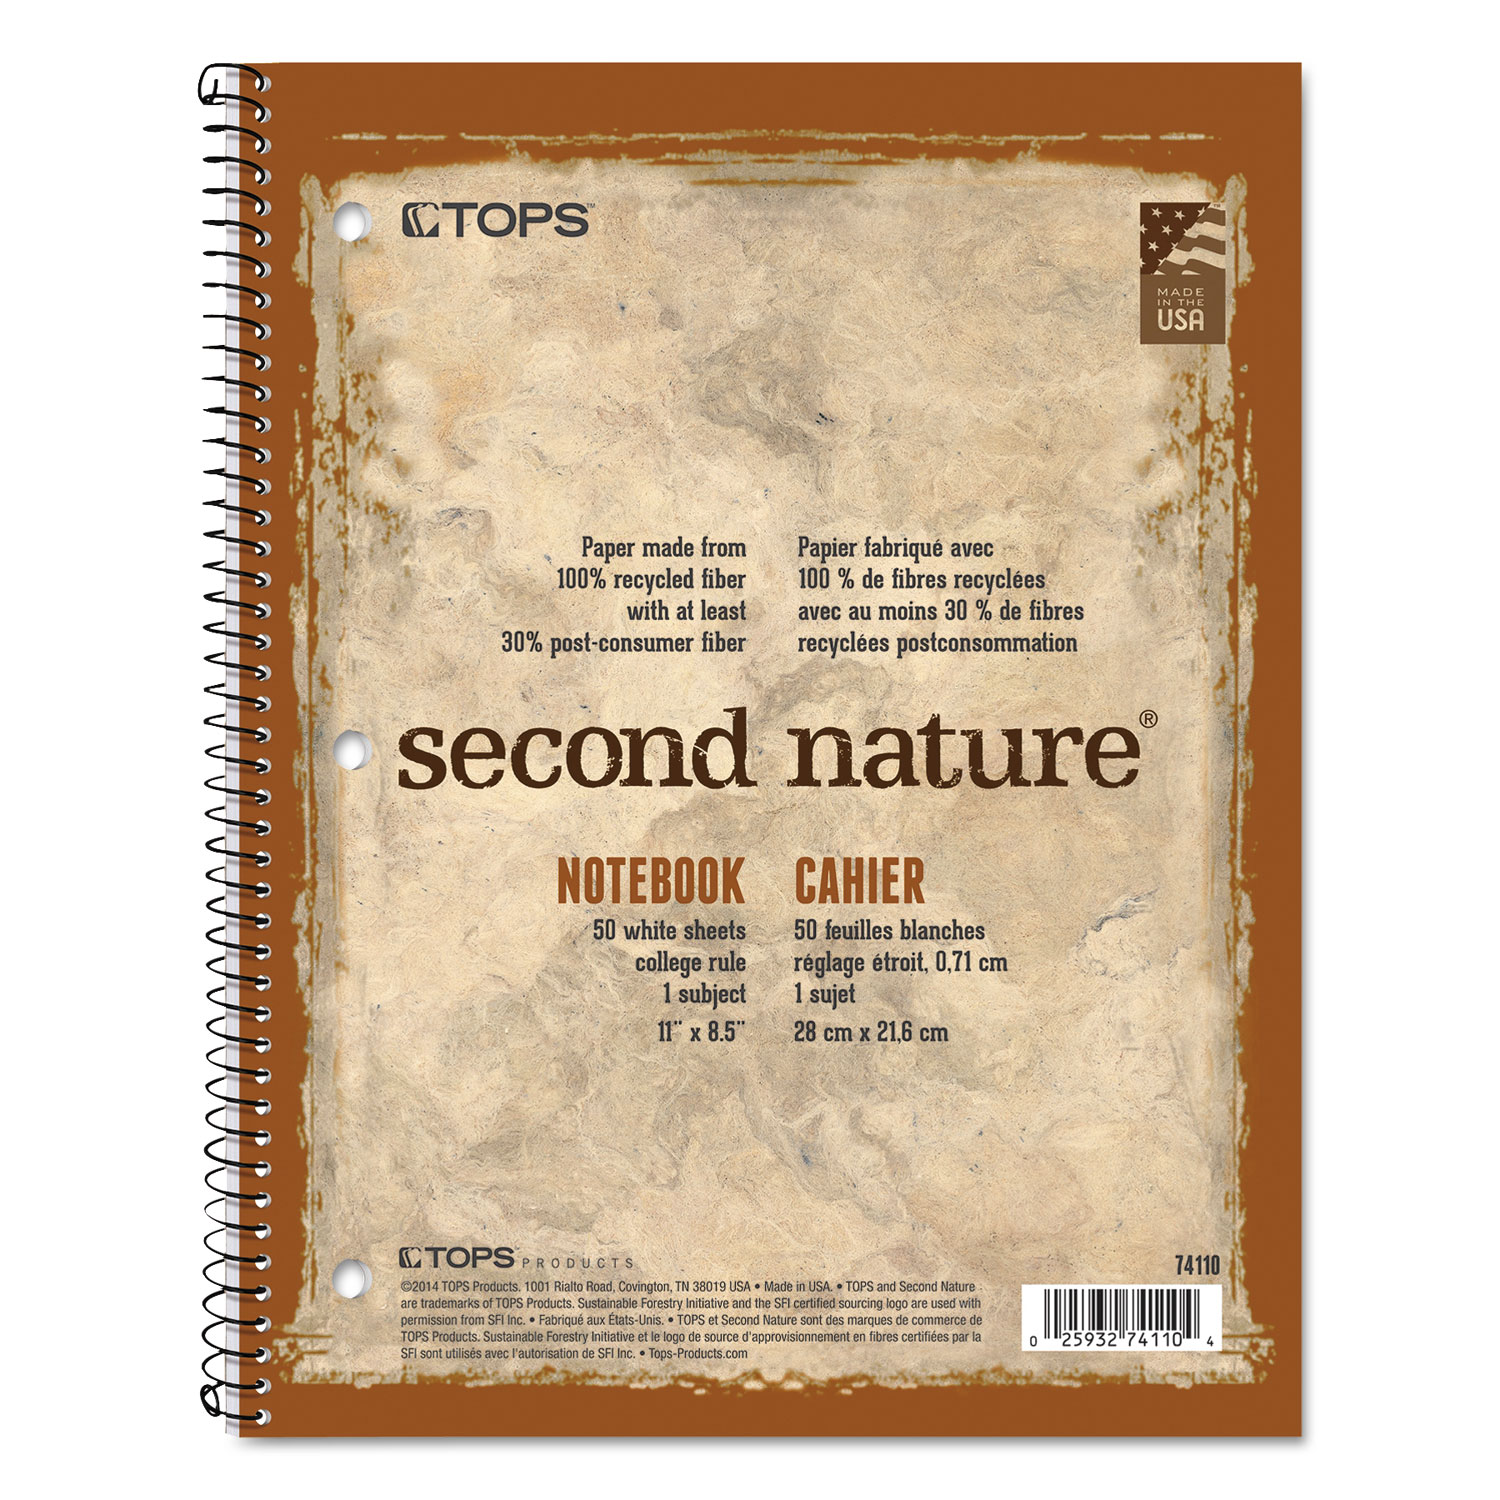  TOPS 74110 Second Nature Single Subject Wirebound Notebooks, 1 Subject, Medium/College Rule, Tan/Brown Cover, 11 x 8.5, 50 Sheets (TOP74110) 